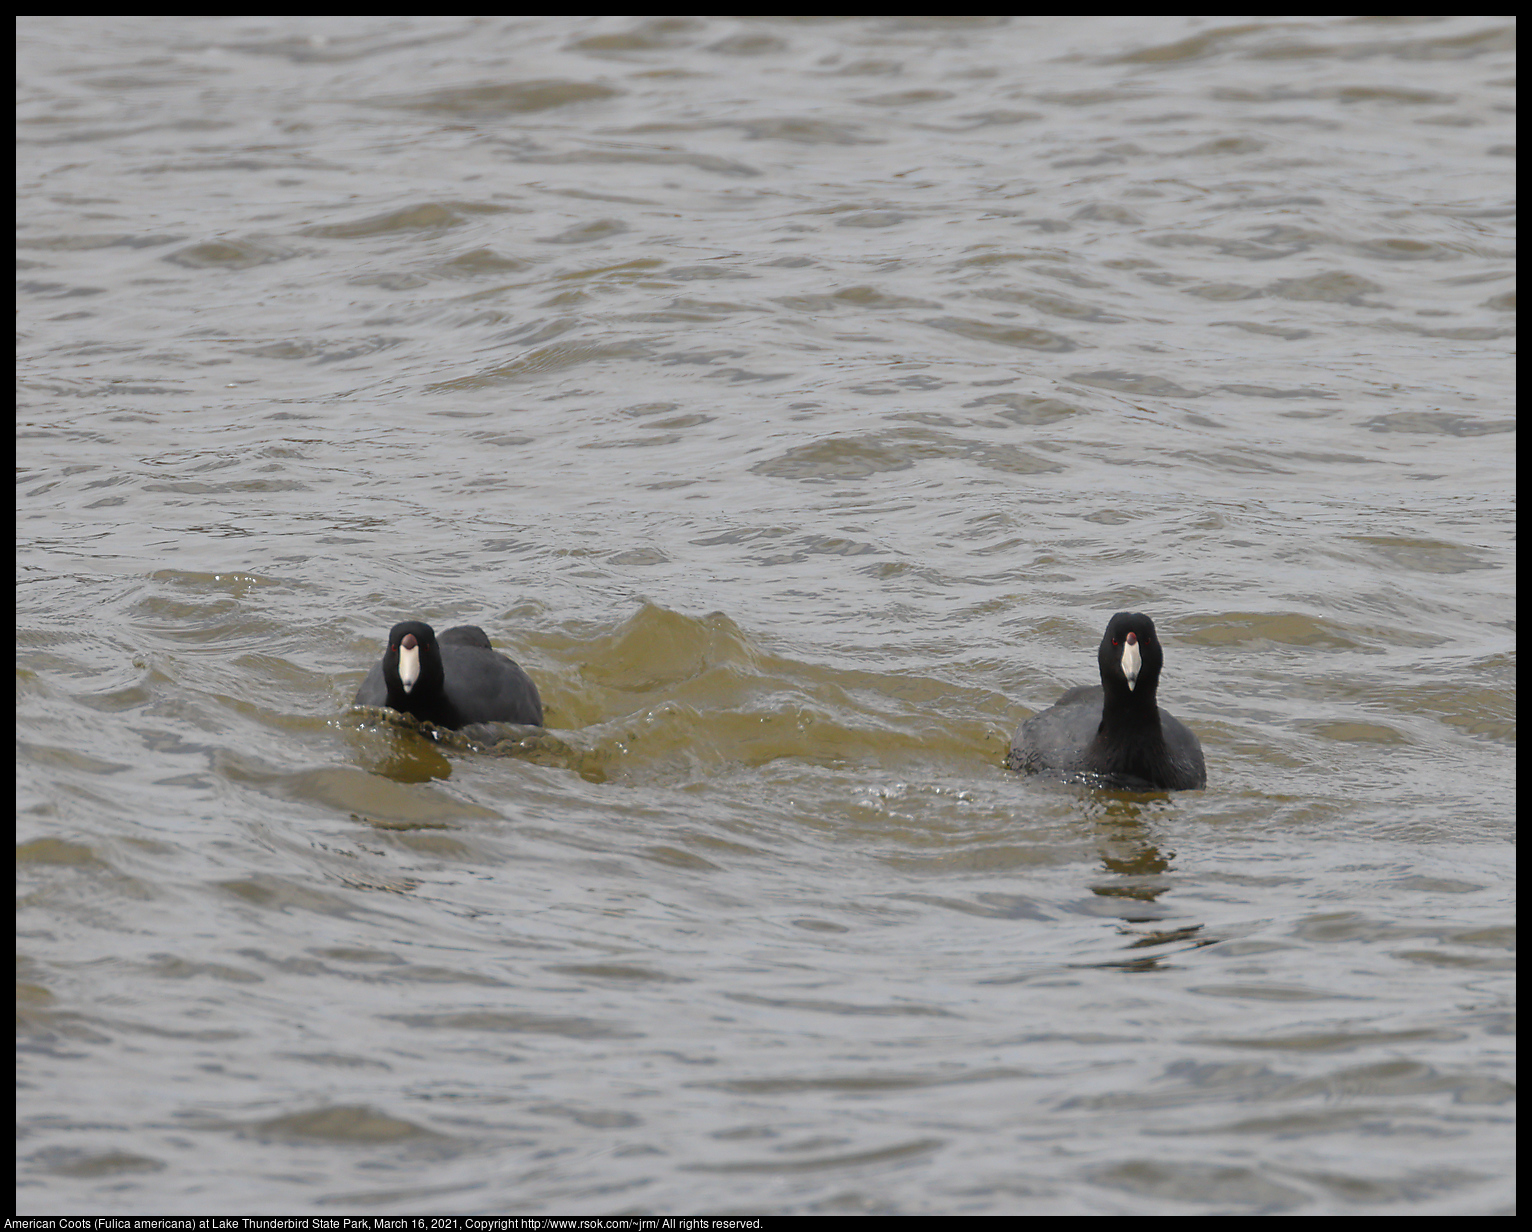 American Coots (Fulica americana) at Lake Thunderbird State Park, March 16, 2021